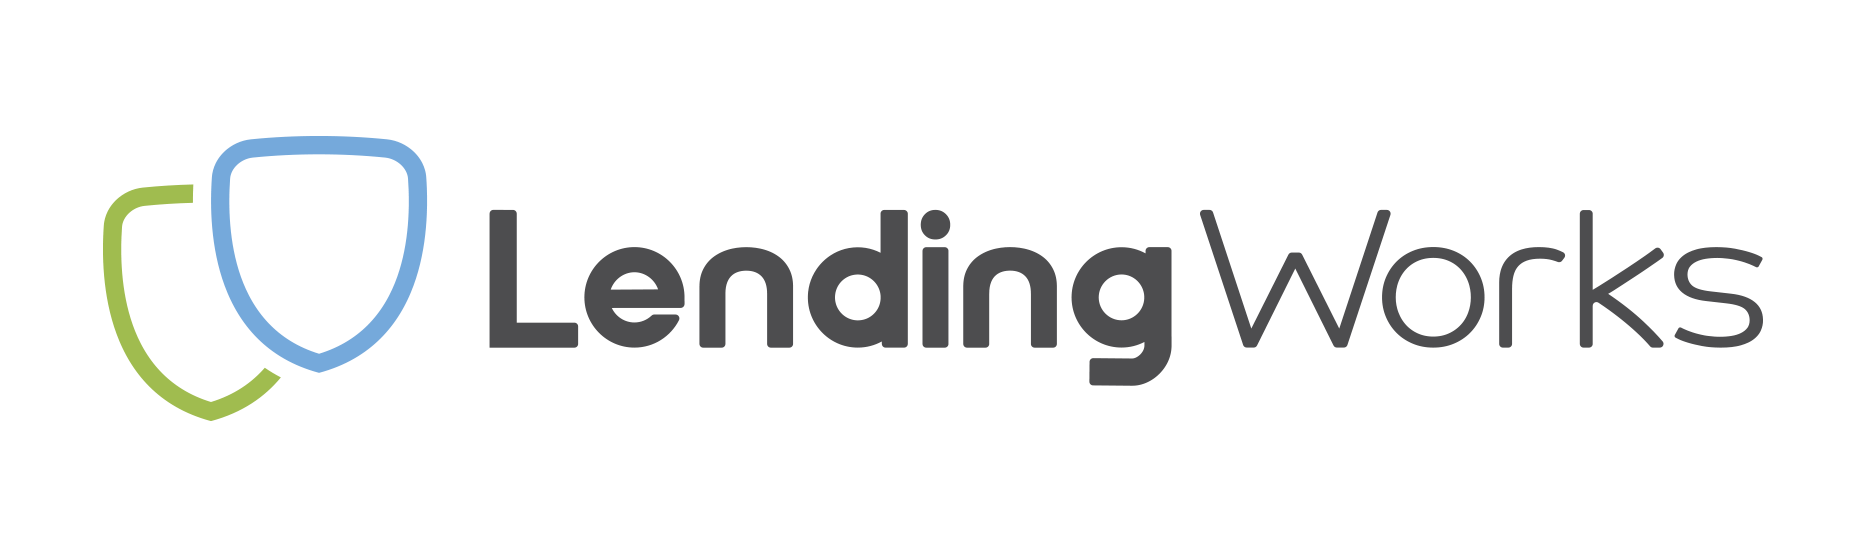 Lending Logo - Lending Works Competitors, Revenue and Employees Company Profile